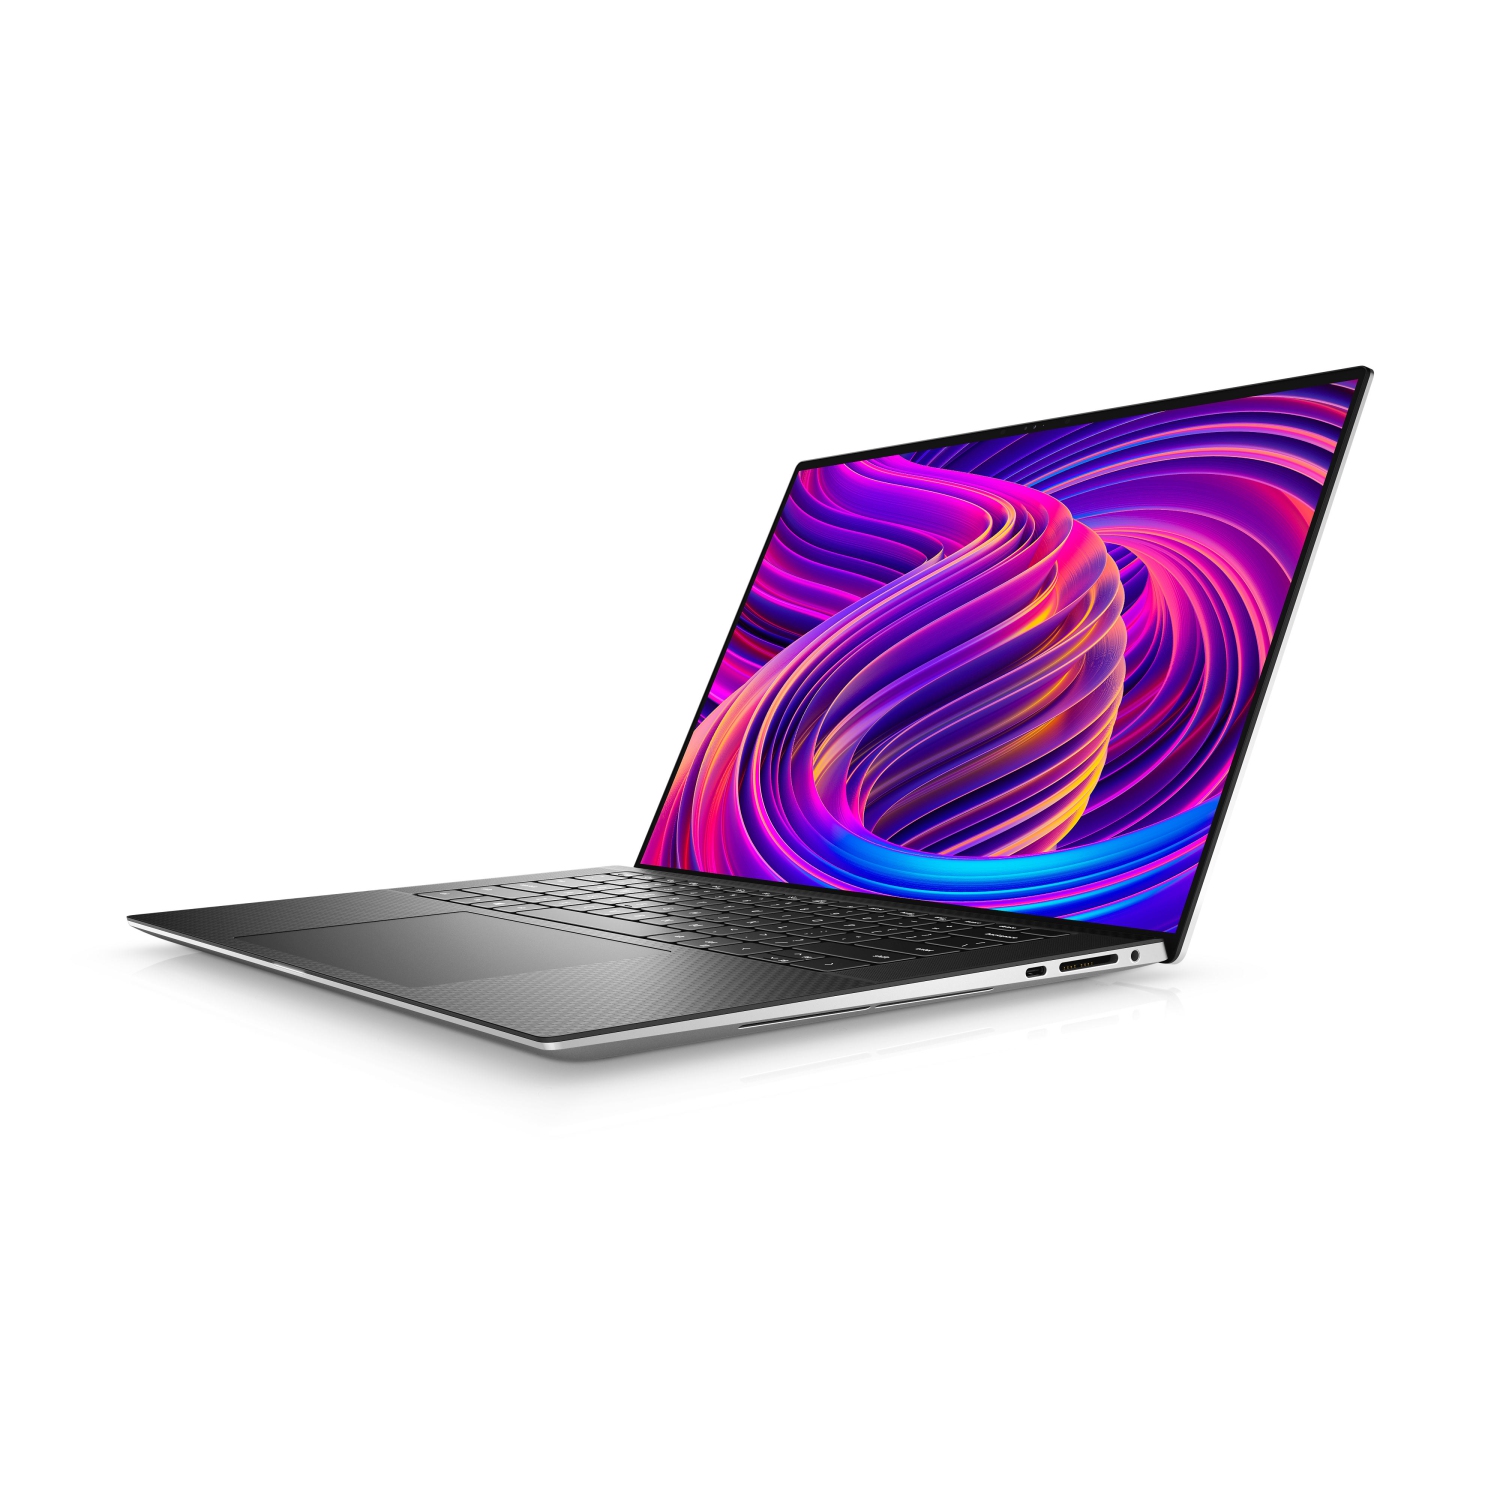 Refurbished (Excellent) - Dell XPS 15 9510 Laptop (2021) | 15.6" FHD+ | Core i7 - 512GB SSD - 32GB RAM - RTX 3050 | 8 Cores @ 4.6 GHz - 11th Gen CPU Certified Refurbished